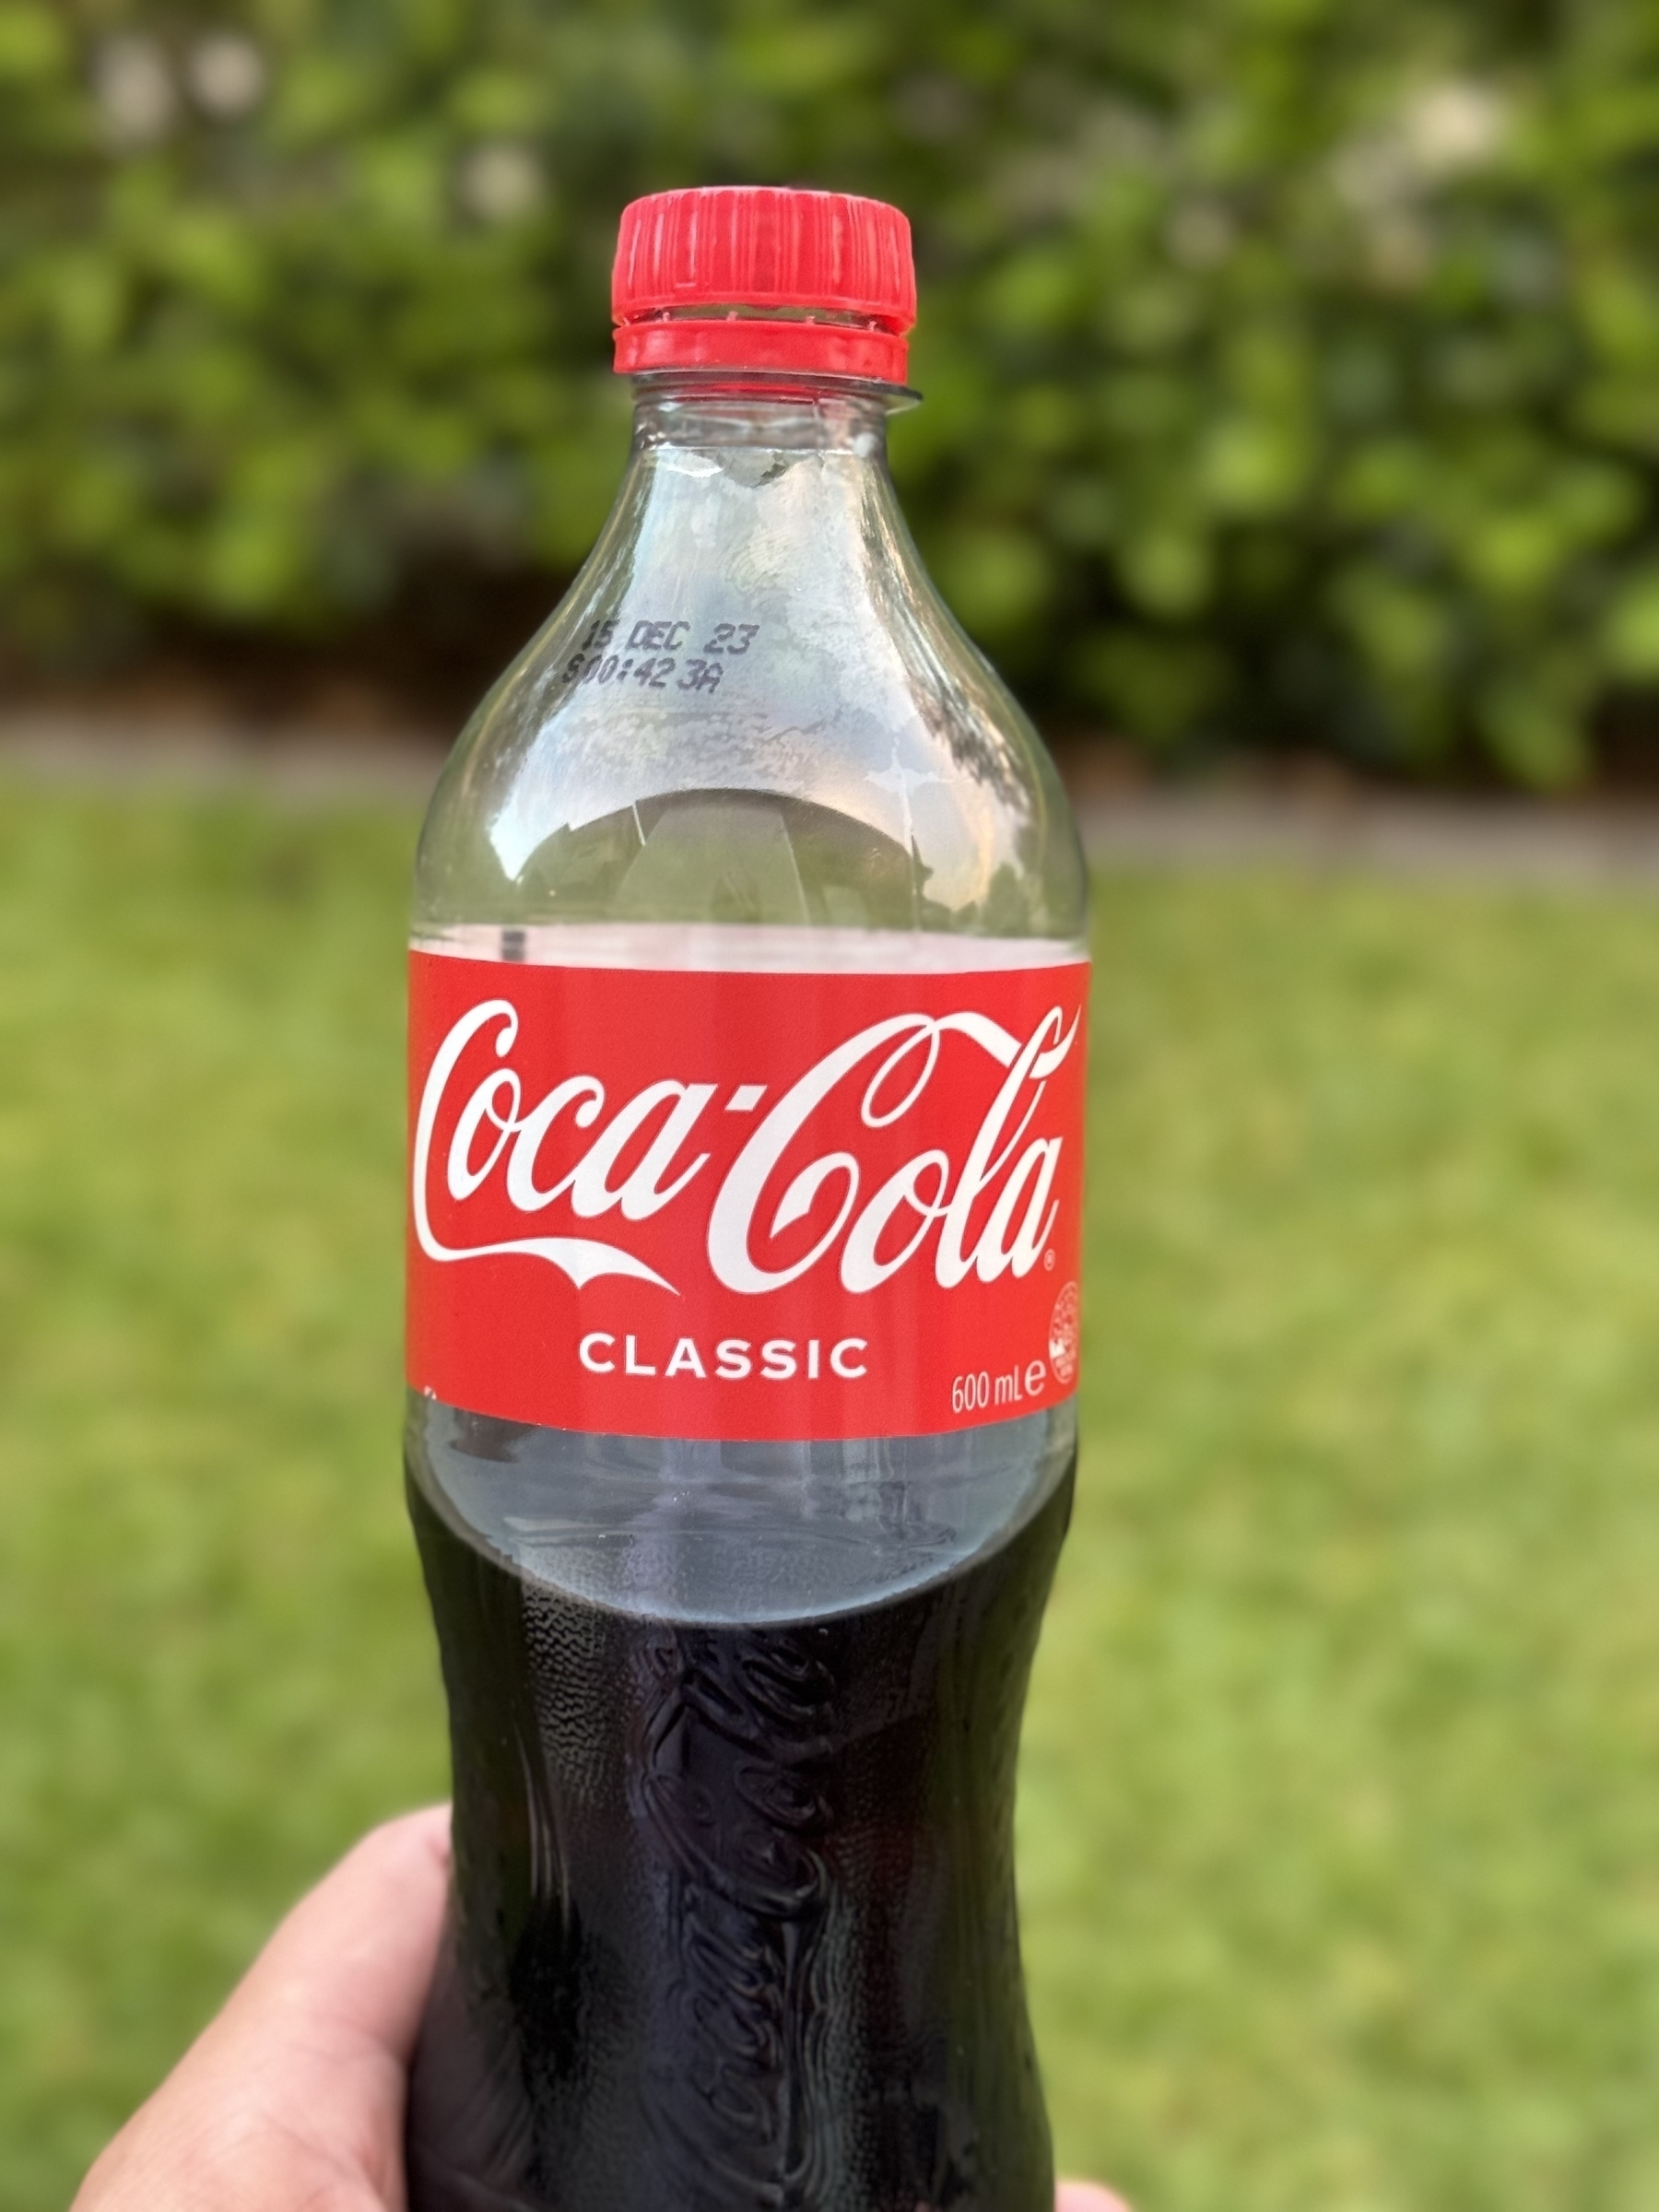 A half-finished bottle of Coca Cola in front of a lawn and a hedge